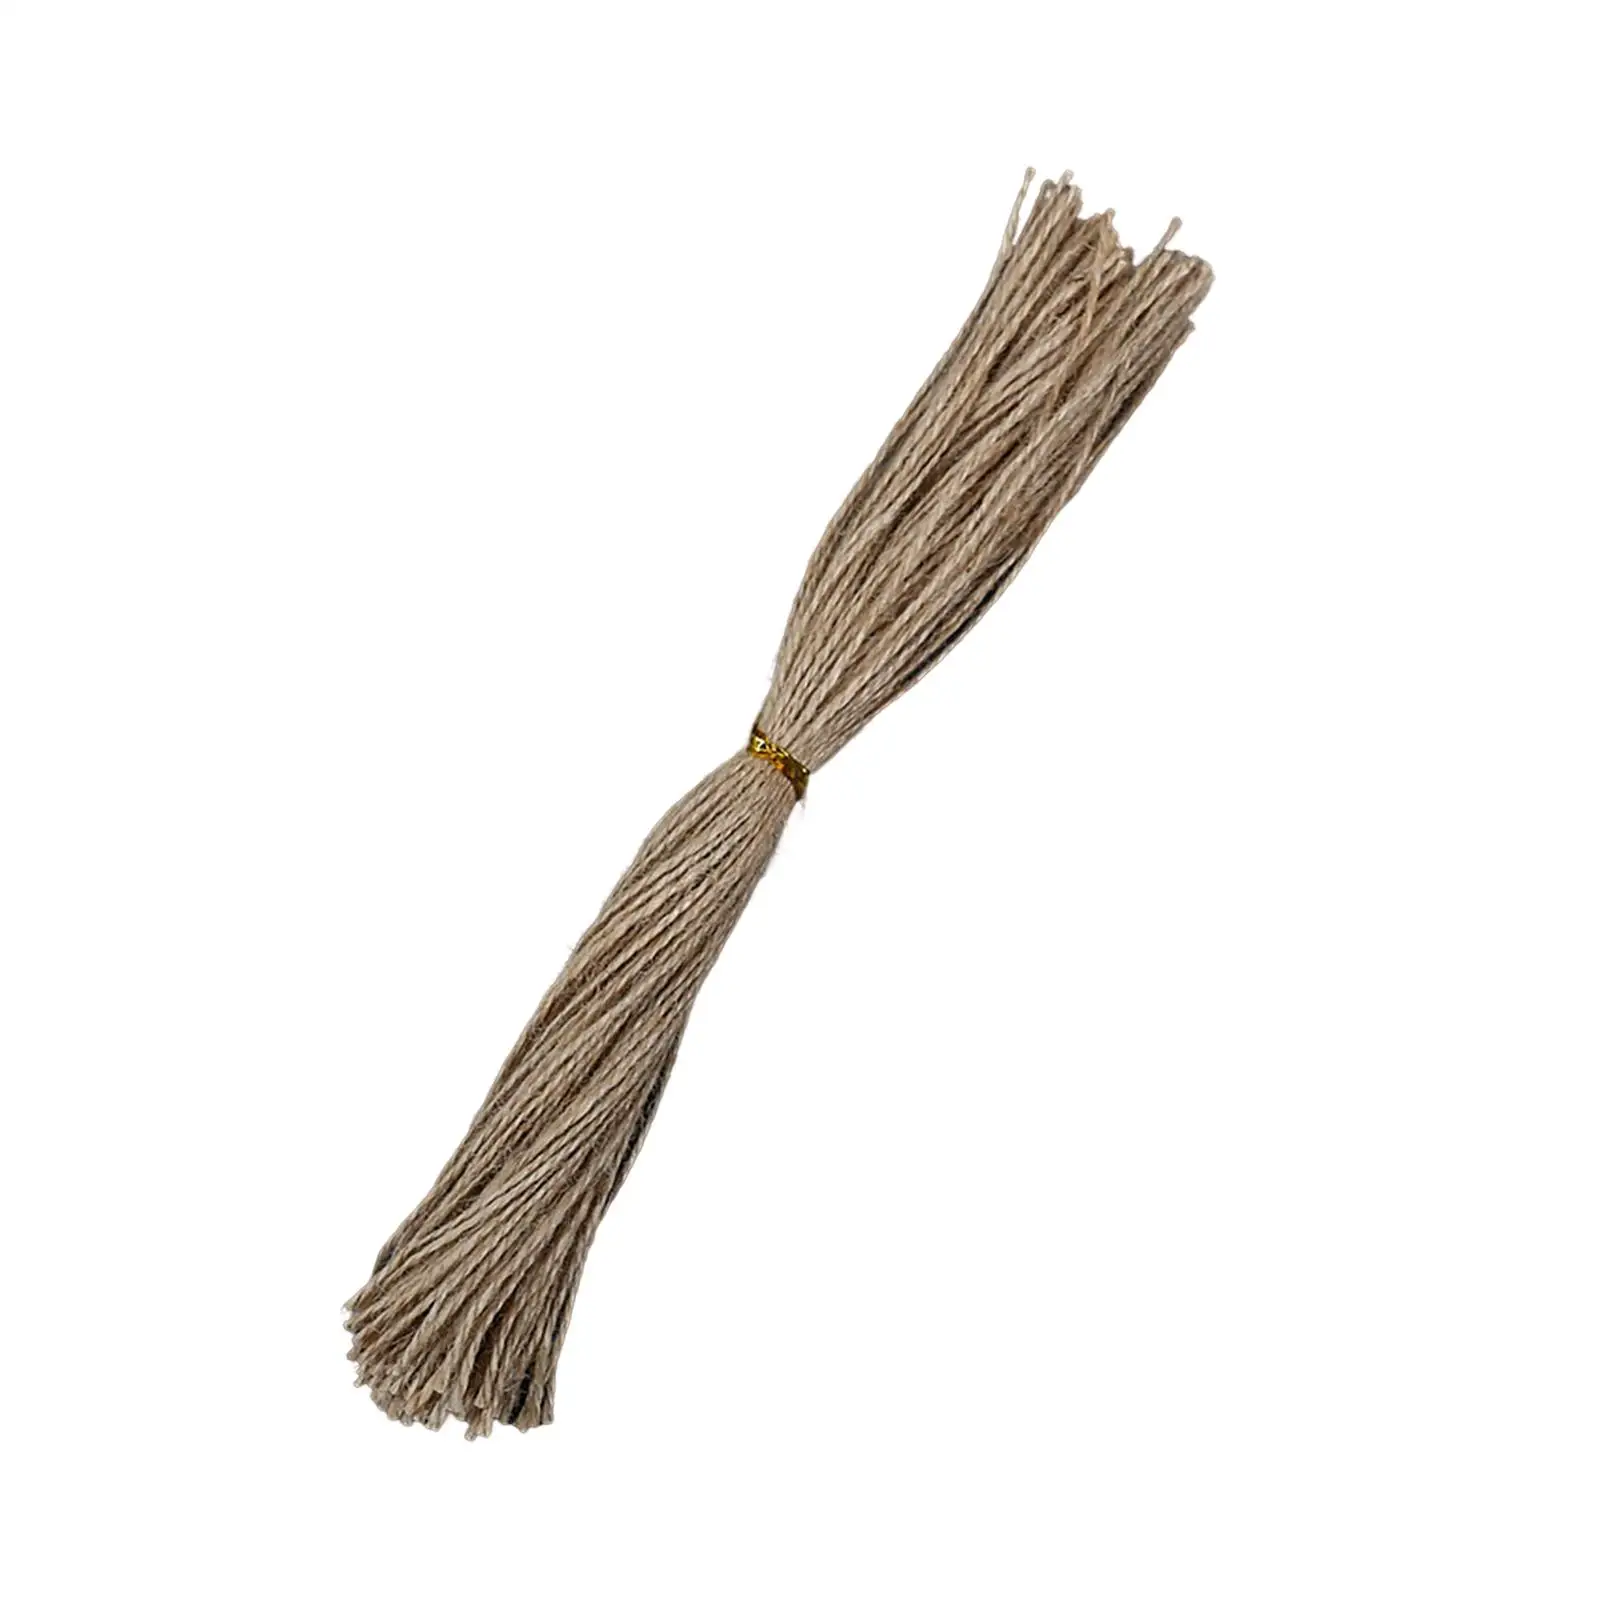 1.5mm Jute Twine Gift Wrapping Twine Durable Rope Present Wrapping Cord for Tags DIY Crafts Gift Wrap Artworks Cards